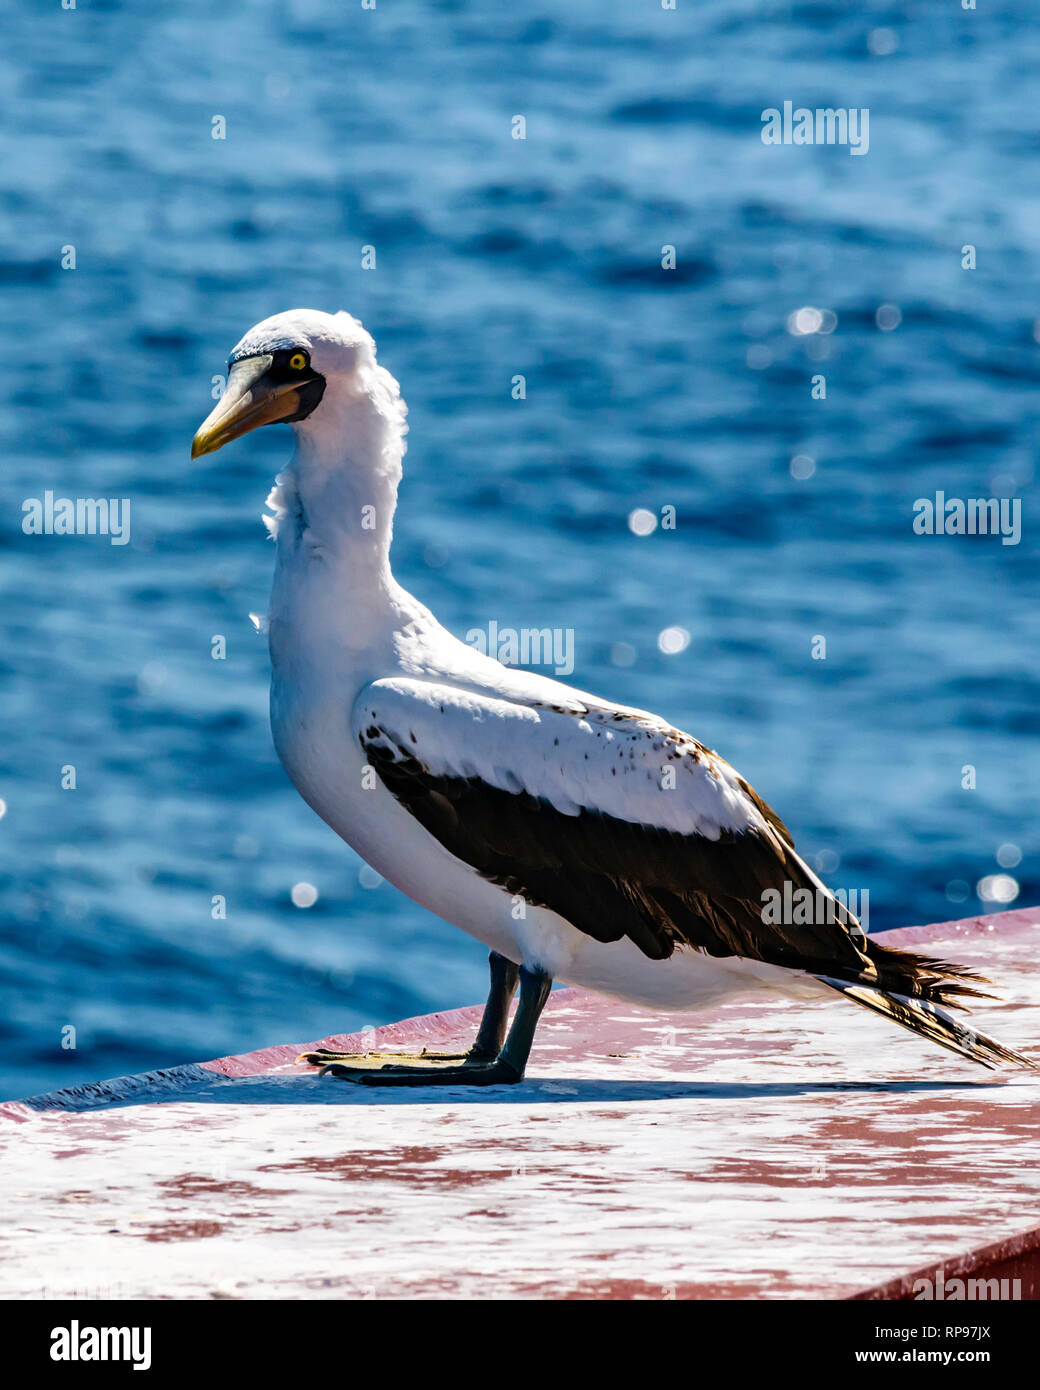 Seagull resting on a ship's bow Stock Photo